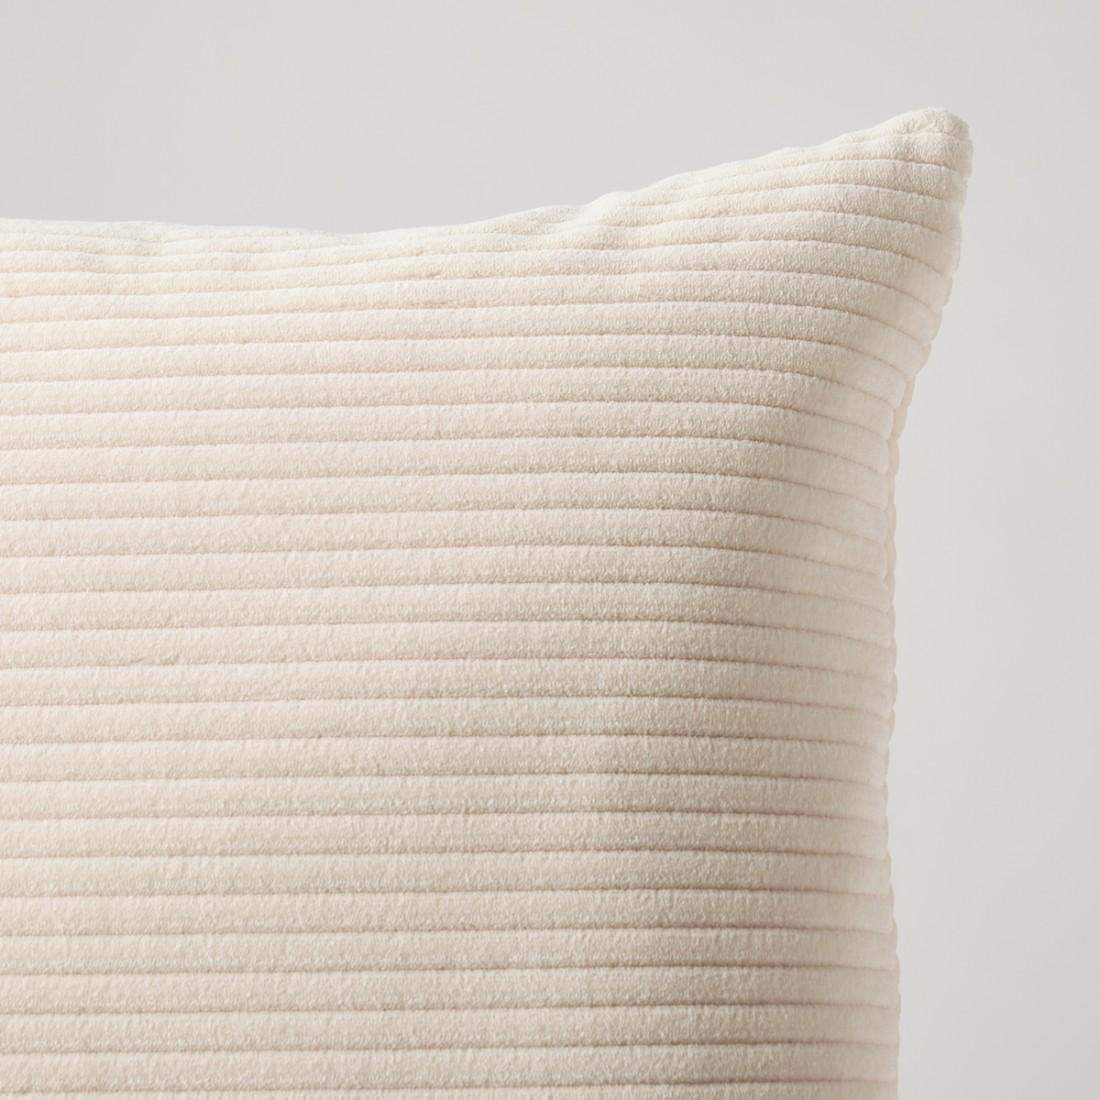 This pillow features Wyatt Corduroy with a knife edge finish. With super soft quarter-inch wales, great texture and a performance finish, Wyatt in winter white is our most versatile corduroy fabric. Easy to use, the cotton classic comes in a range